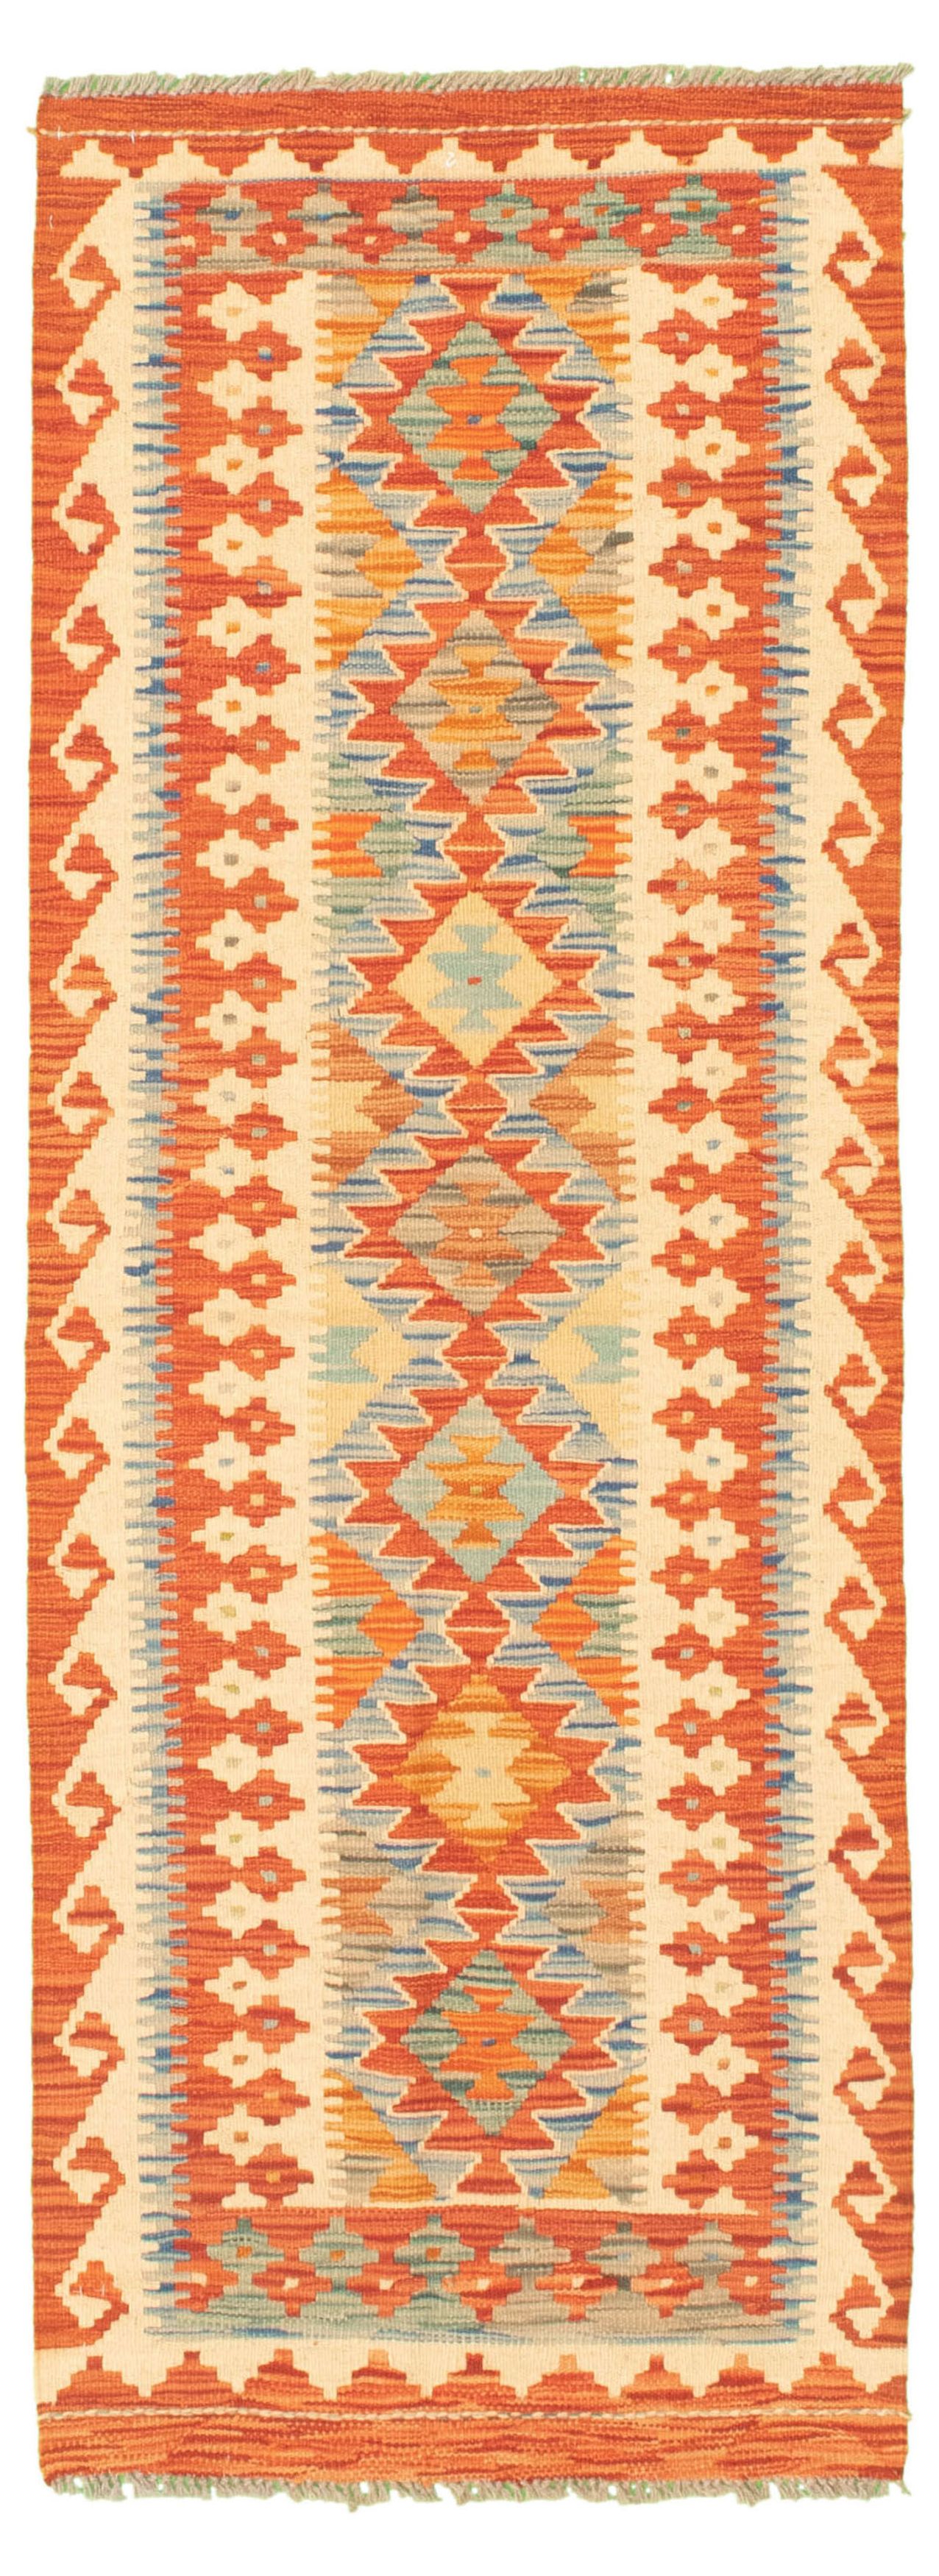 Hand woven Bold and Colorful  Dark Copper Wool Kilim 2'3" x 6'4" Size: 2'3" x 6'4"  